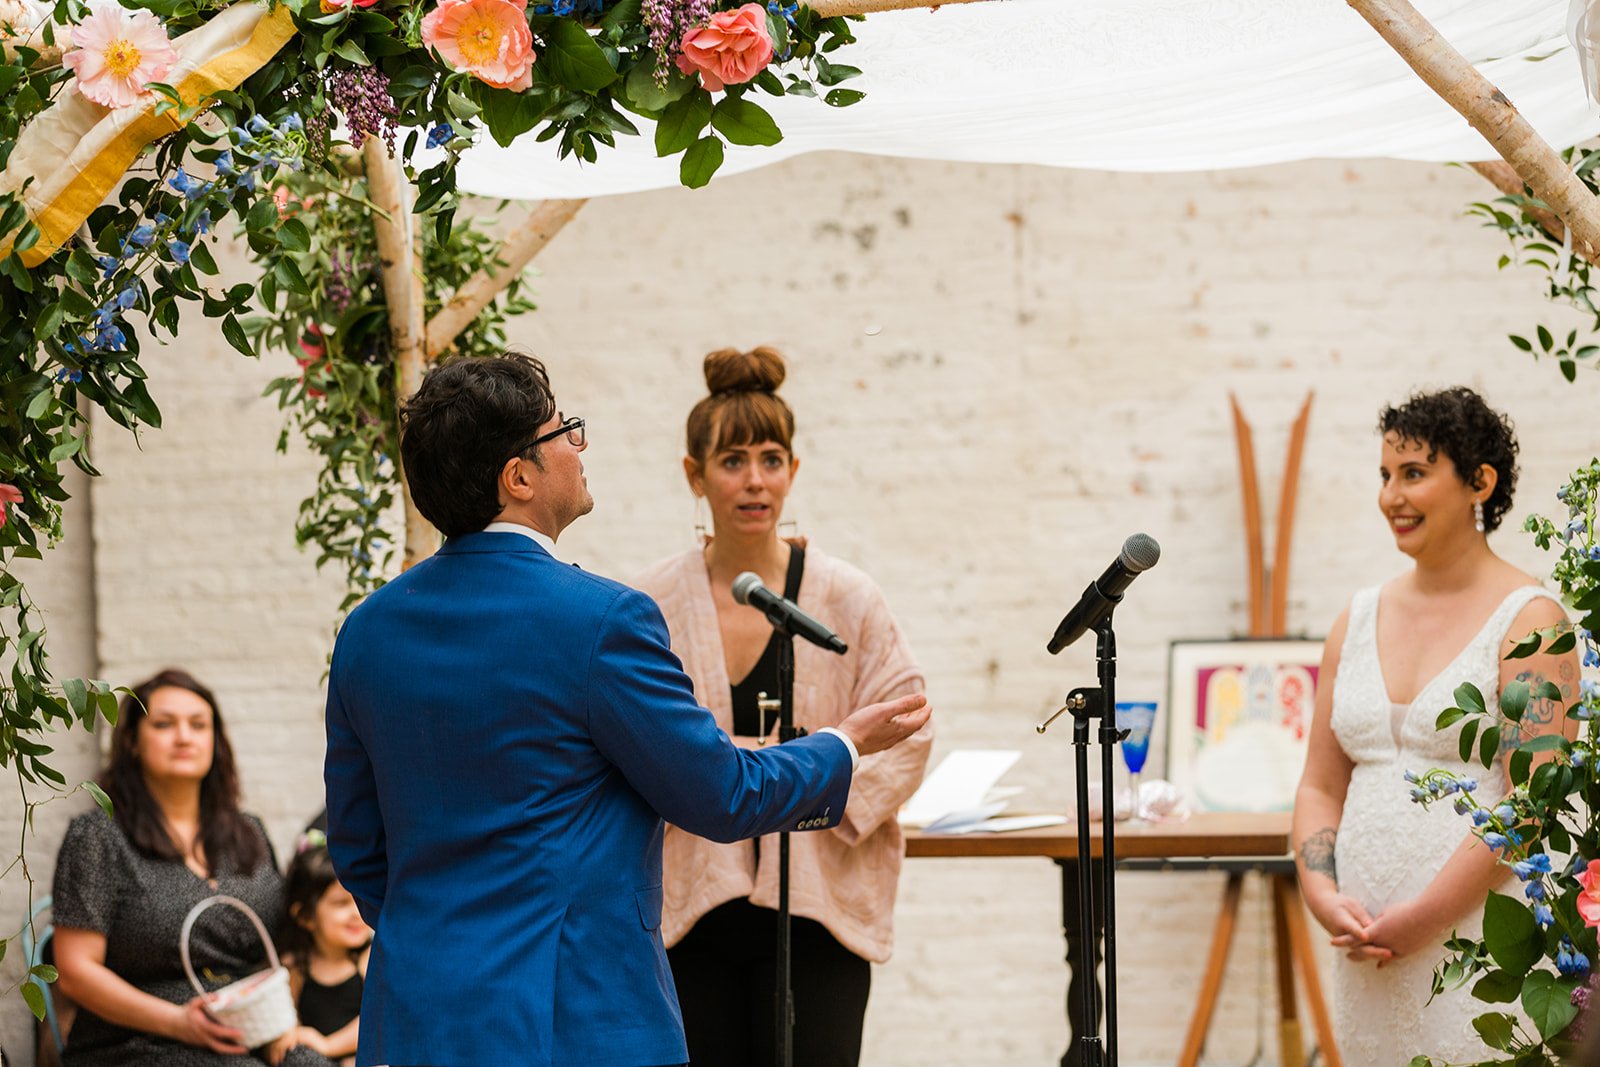  Candid, documentary photo of the groom flipping a coin to see who goes first in vow reading under the chupah during their nontraditional Jewish and Venezuelan wedding ceremony in the round at The Joinery Chicago an Industrial loft wedding venue In L